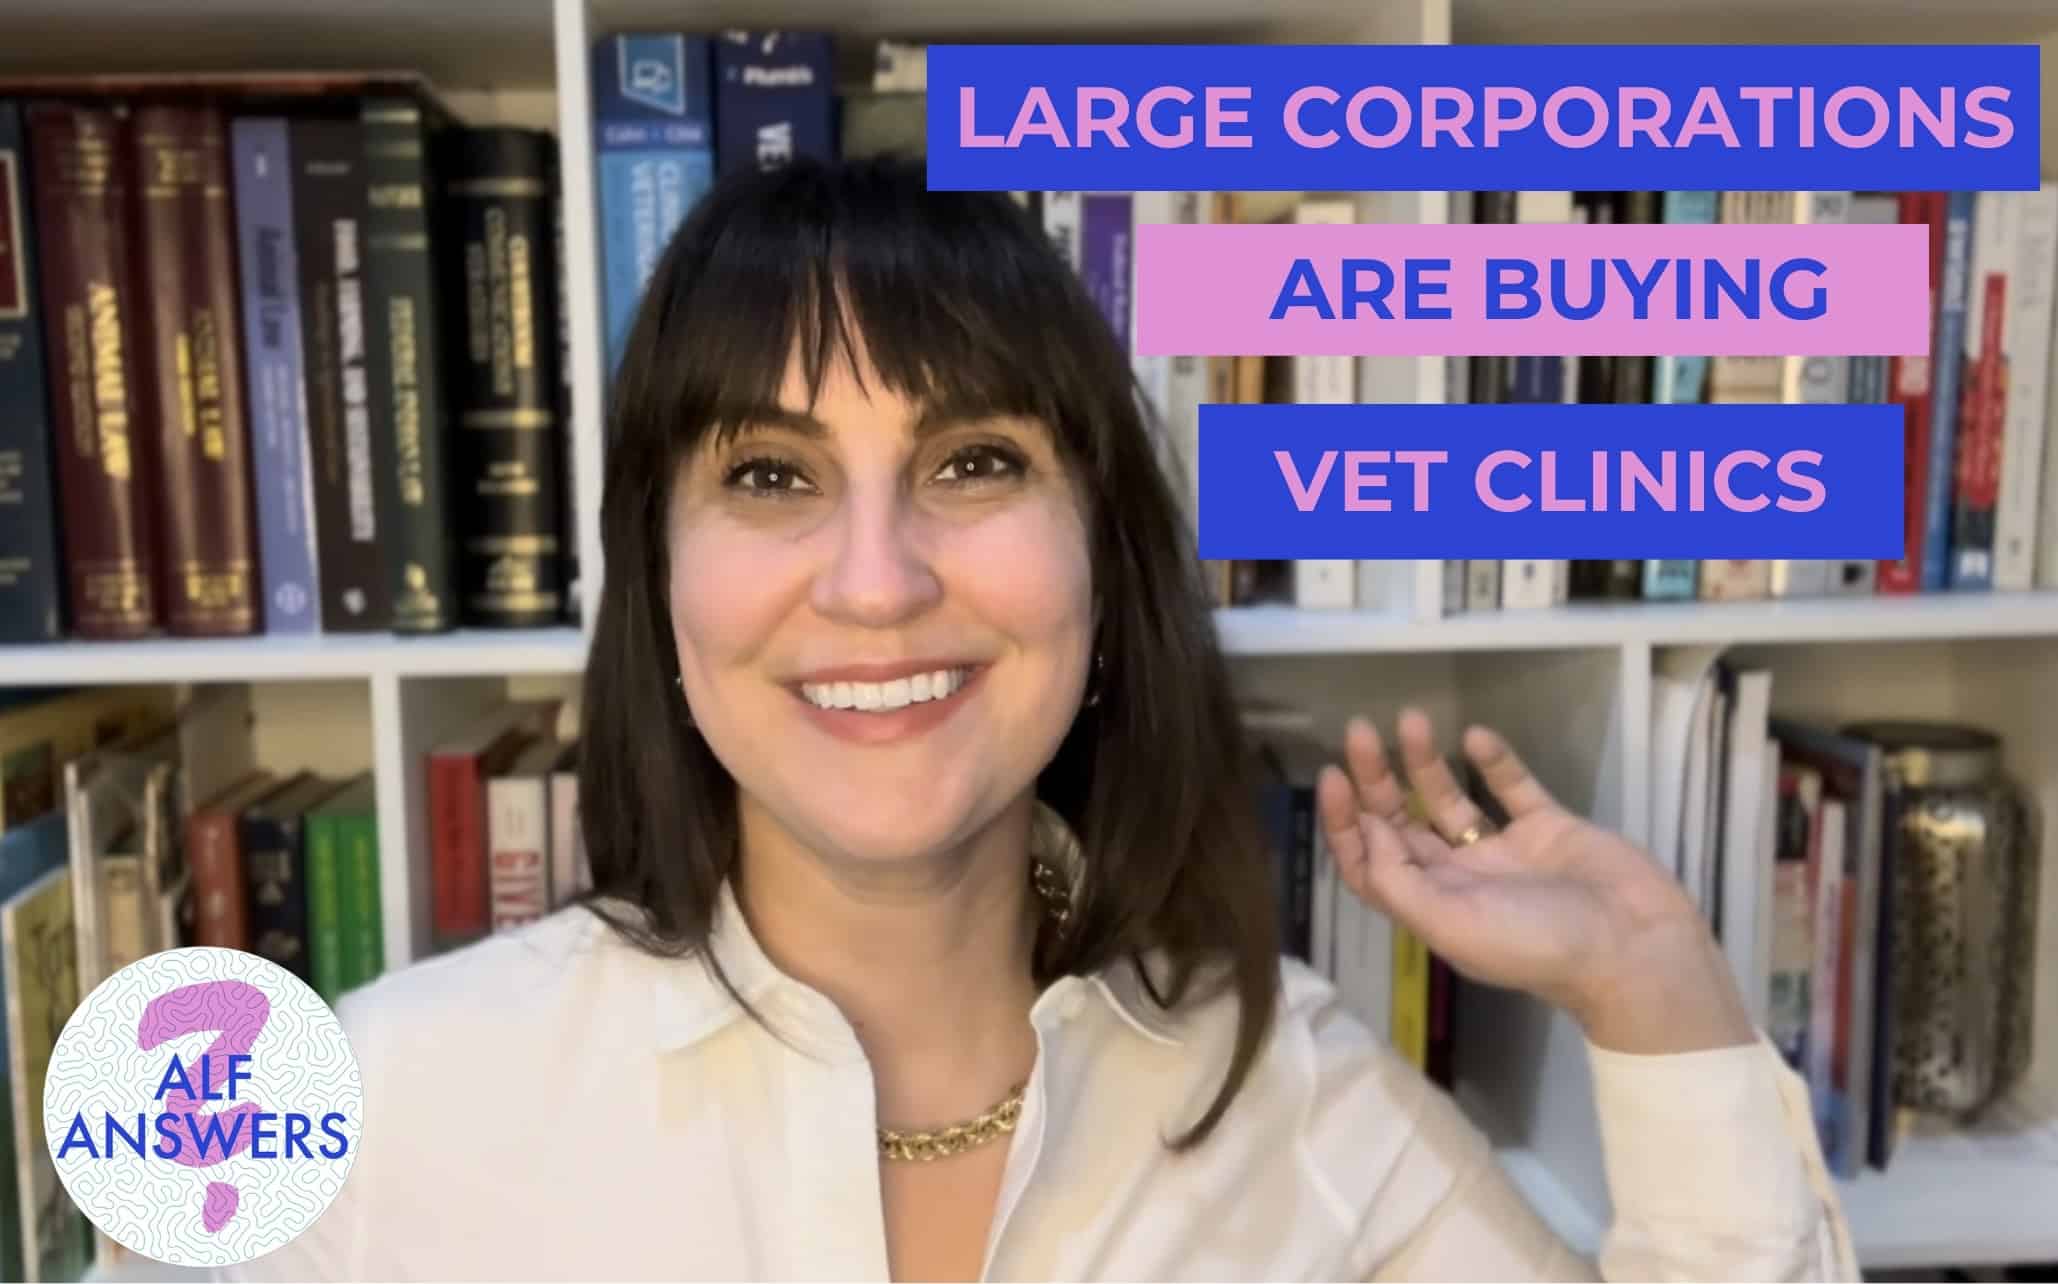 ALF Answers: “Large Corporations are Buying Vet Clinics”